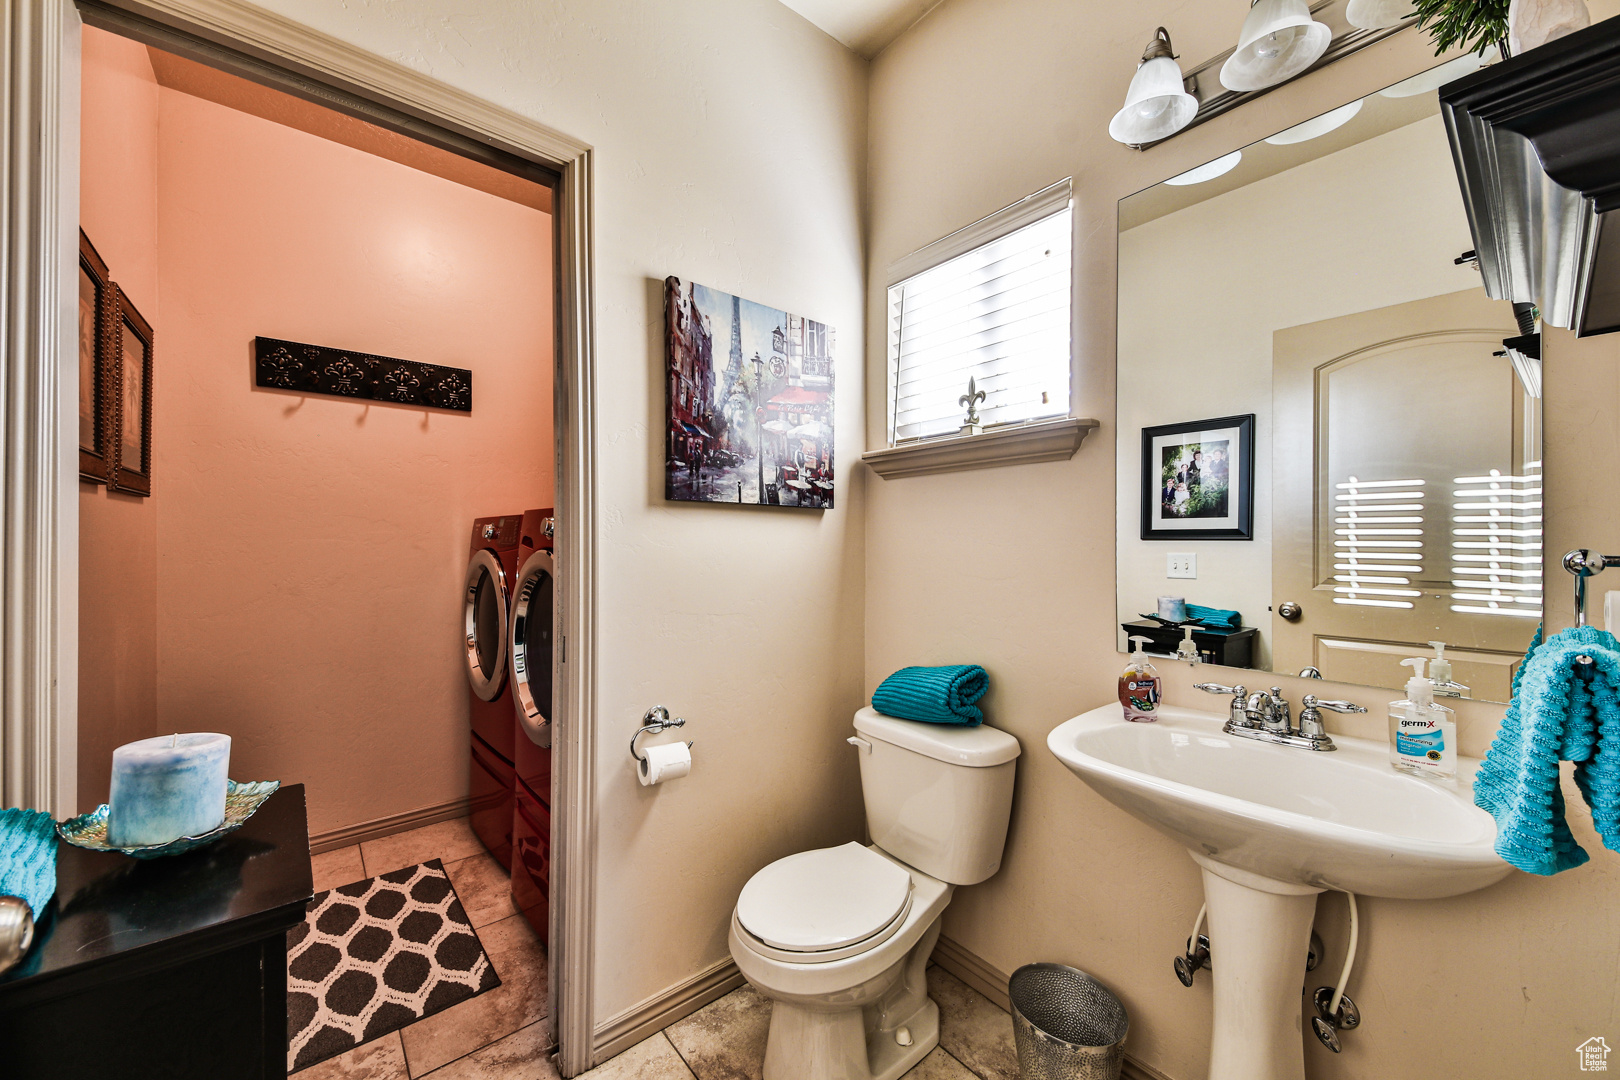 Bathroom with toilet, tile floors, and washing machine and clothes dryer